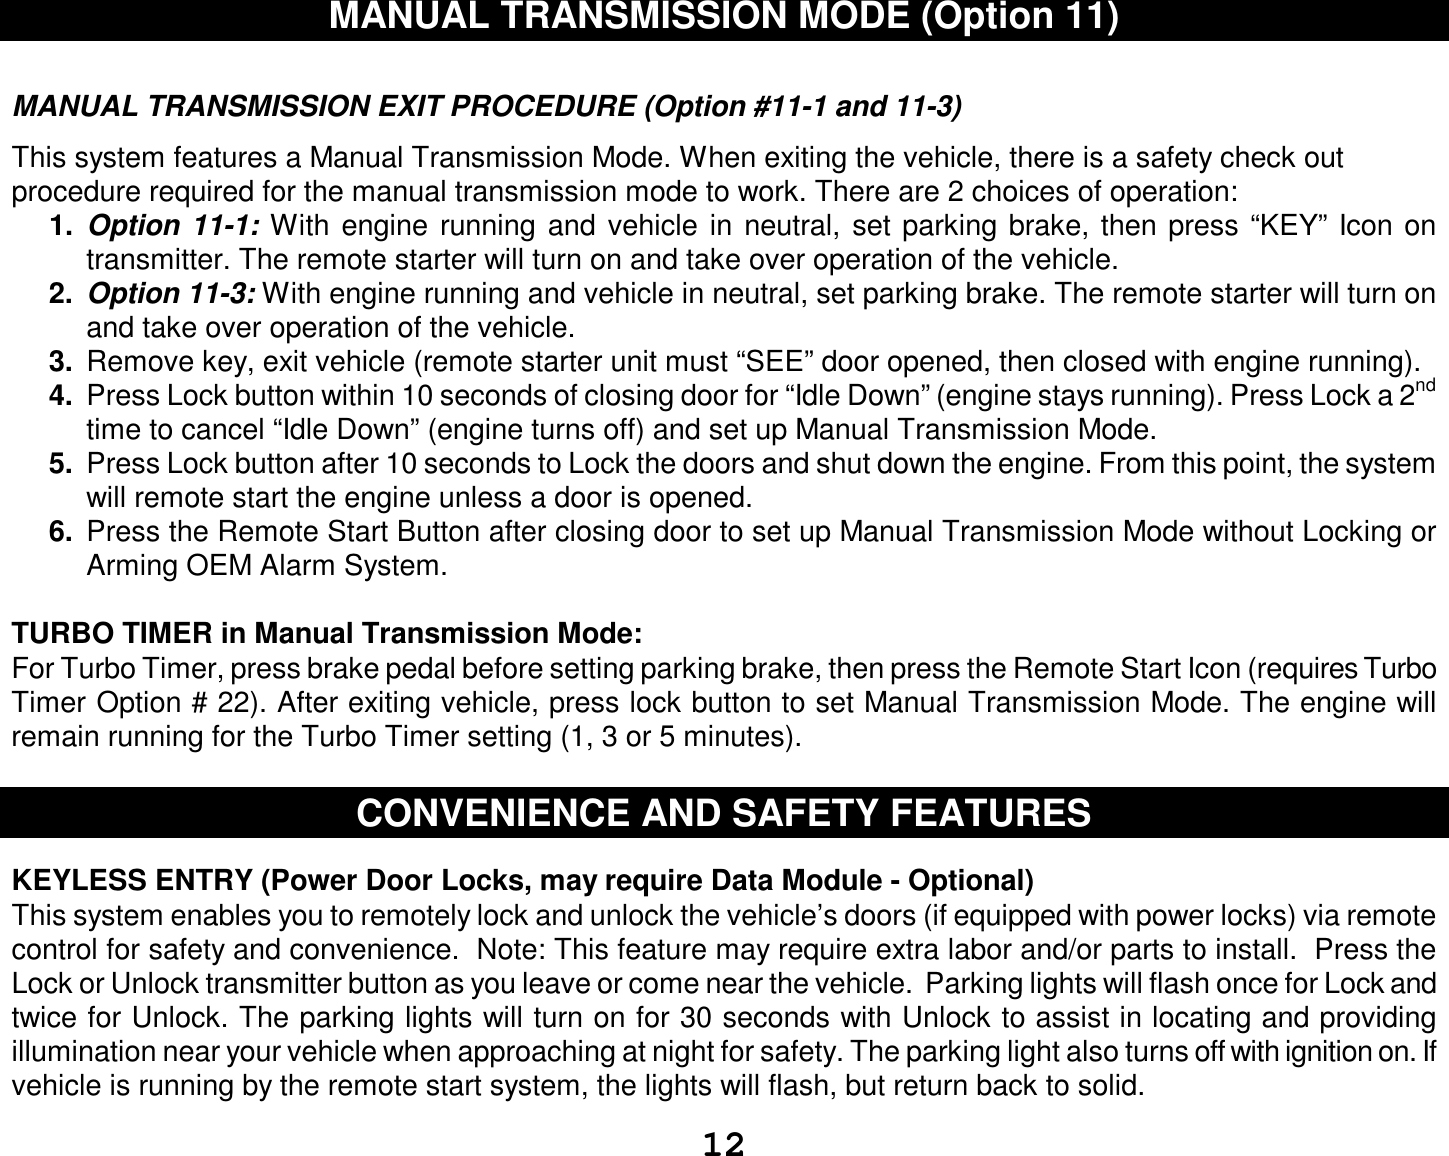  12 MANUAL TRANSMISSION MODE (Option 11)   MANUAL TRANSMISSION EXIT PROCEDURE (Option #11-1 and 11-3)  This system features a Manual Transmission Mode. When exiting the vehicle, there is a safety check out procedure required for the manual transmission mode to work. There are 2 choices of operation:  1.  Option 11-1: With engine running and vehicle in neutral, set parking brake, then press “KEY” Icon on transmitter. The remote starter will turn on and take over operation of the vehicle. 2.  Option 11-3: With engine running and vehicle in neutral, set parking brake. The remote starter will turn on and take over operation of the vehicle. 3.  Remove key, exit vehicle (remote starter unit must “SEE” door opened, then closed with engine running). 4.  Press Lock button within 10 seconds of closing door for “Idle Down” (engine stays running). Press Lock a 2nd time to cancel “Idle Down” (engine turns off) and set up Manual Transmission Mode. 5.  Press Lock button after 10 seconds to Lock the doors and shut down the engine. From this point, the system will remote start the engine unless a door is opened. 6.  Press the Remote Start Button after closing door to set up Manual Transmission Mode without Locking or Arming OEM Alarm System.   TURBO TIMER in Manual Transmission Mode: For Turbo Timer, press brake pedal before setting parking brake, then press the Remote Start Icon (requires Turbo Timer Option # 22). After exiting vehicle, press lock button to set Manual Transmission Mode. The engine will remain running for the Turbo Timer setting (1, 3 or 5 minutes).   CONVENIENCE AND SAFETY FEATURES   KEYLESS ENTRY (Power Door Locks, may require Data Module - Optional)  This system enables you to remotely lock and unlock the vehicle’s doors (if equipped with power locks) via remote control for safety and convenience.  Note: This feature may require extra labor and/or parts to install.  Press the Lock or Unlock transmitter button as you leave or come near the vehicle.  Parking lights will flash once for Lock and twice for Unlock. The parking lights will turn on for 30 seconds with Unlock to assist in locating and providing illumination near your vehicle when approaching at night for safety. The parking light also turns off with ignition on. If vehicle is running by the remote start system, the lights will flash, but return back to solid. 